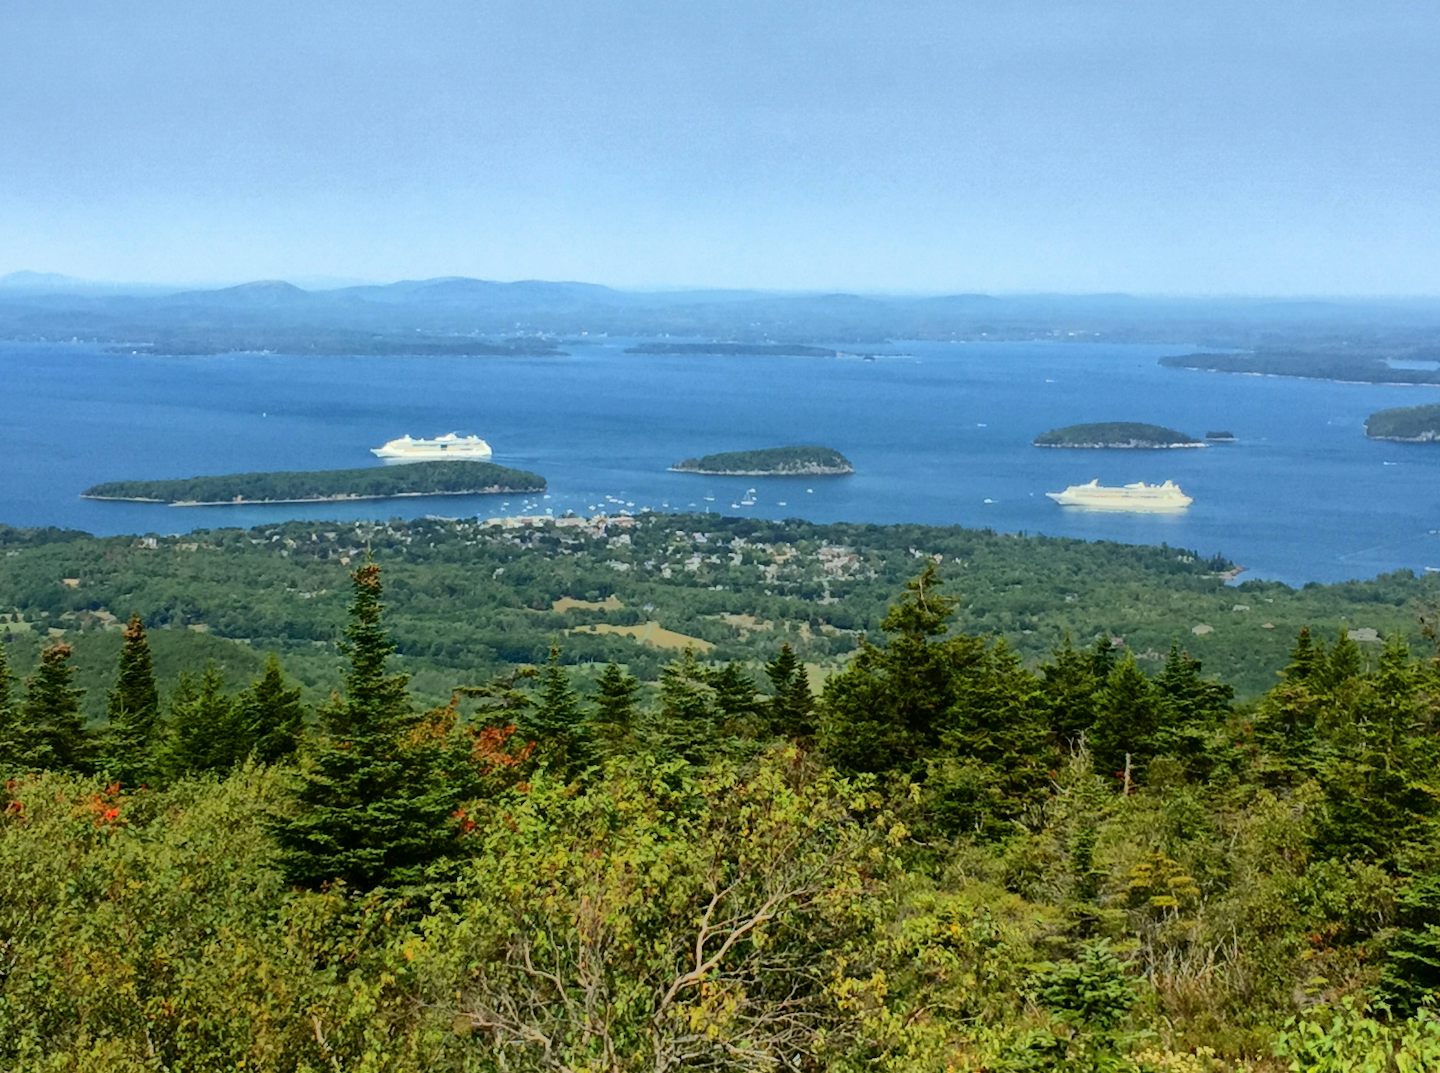 View from top of Cadillac Mountain in Acadia National Park. Our ship on rig